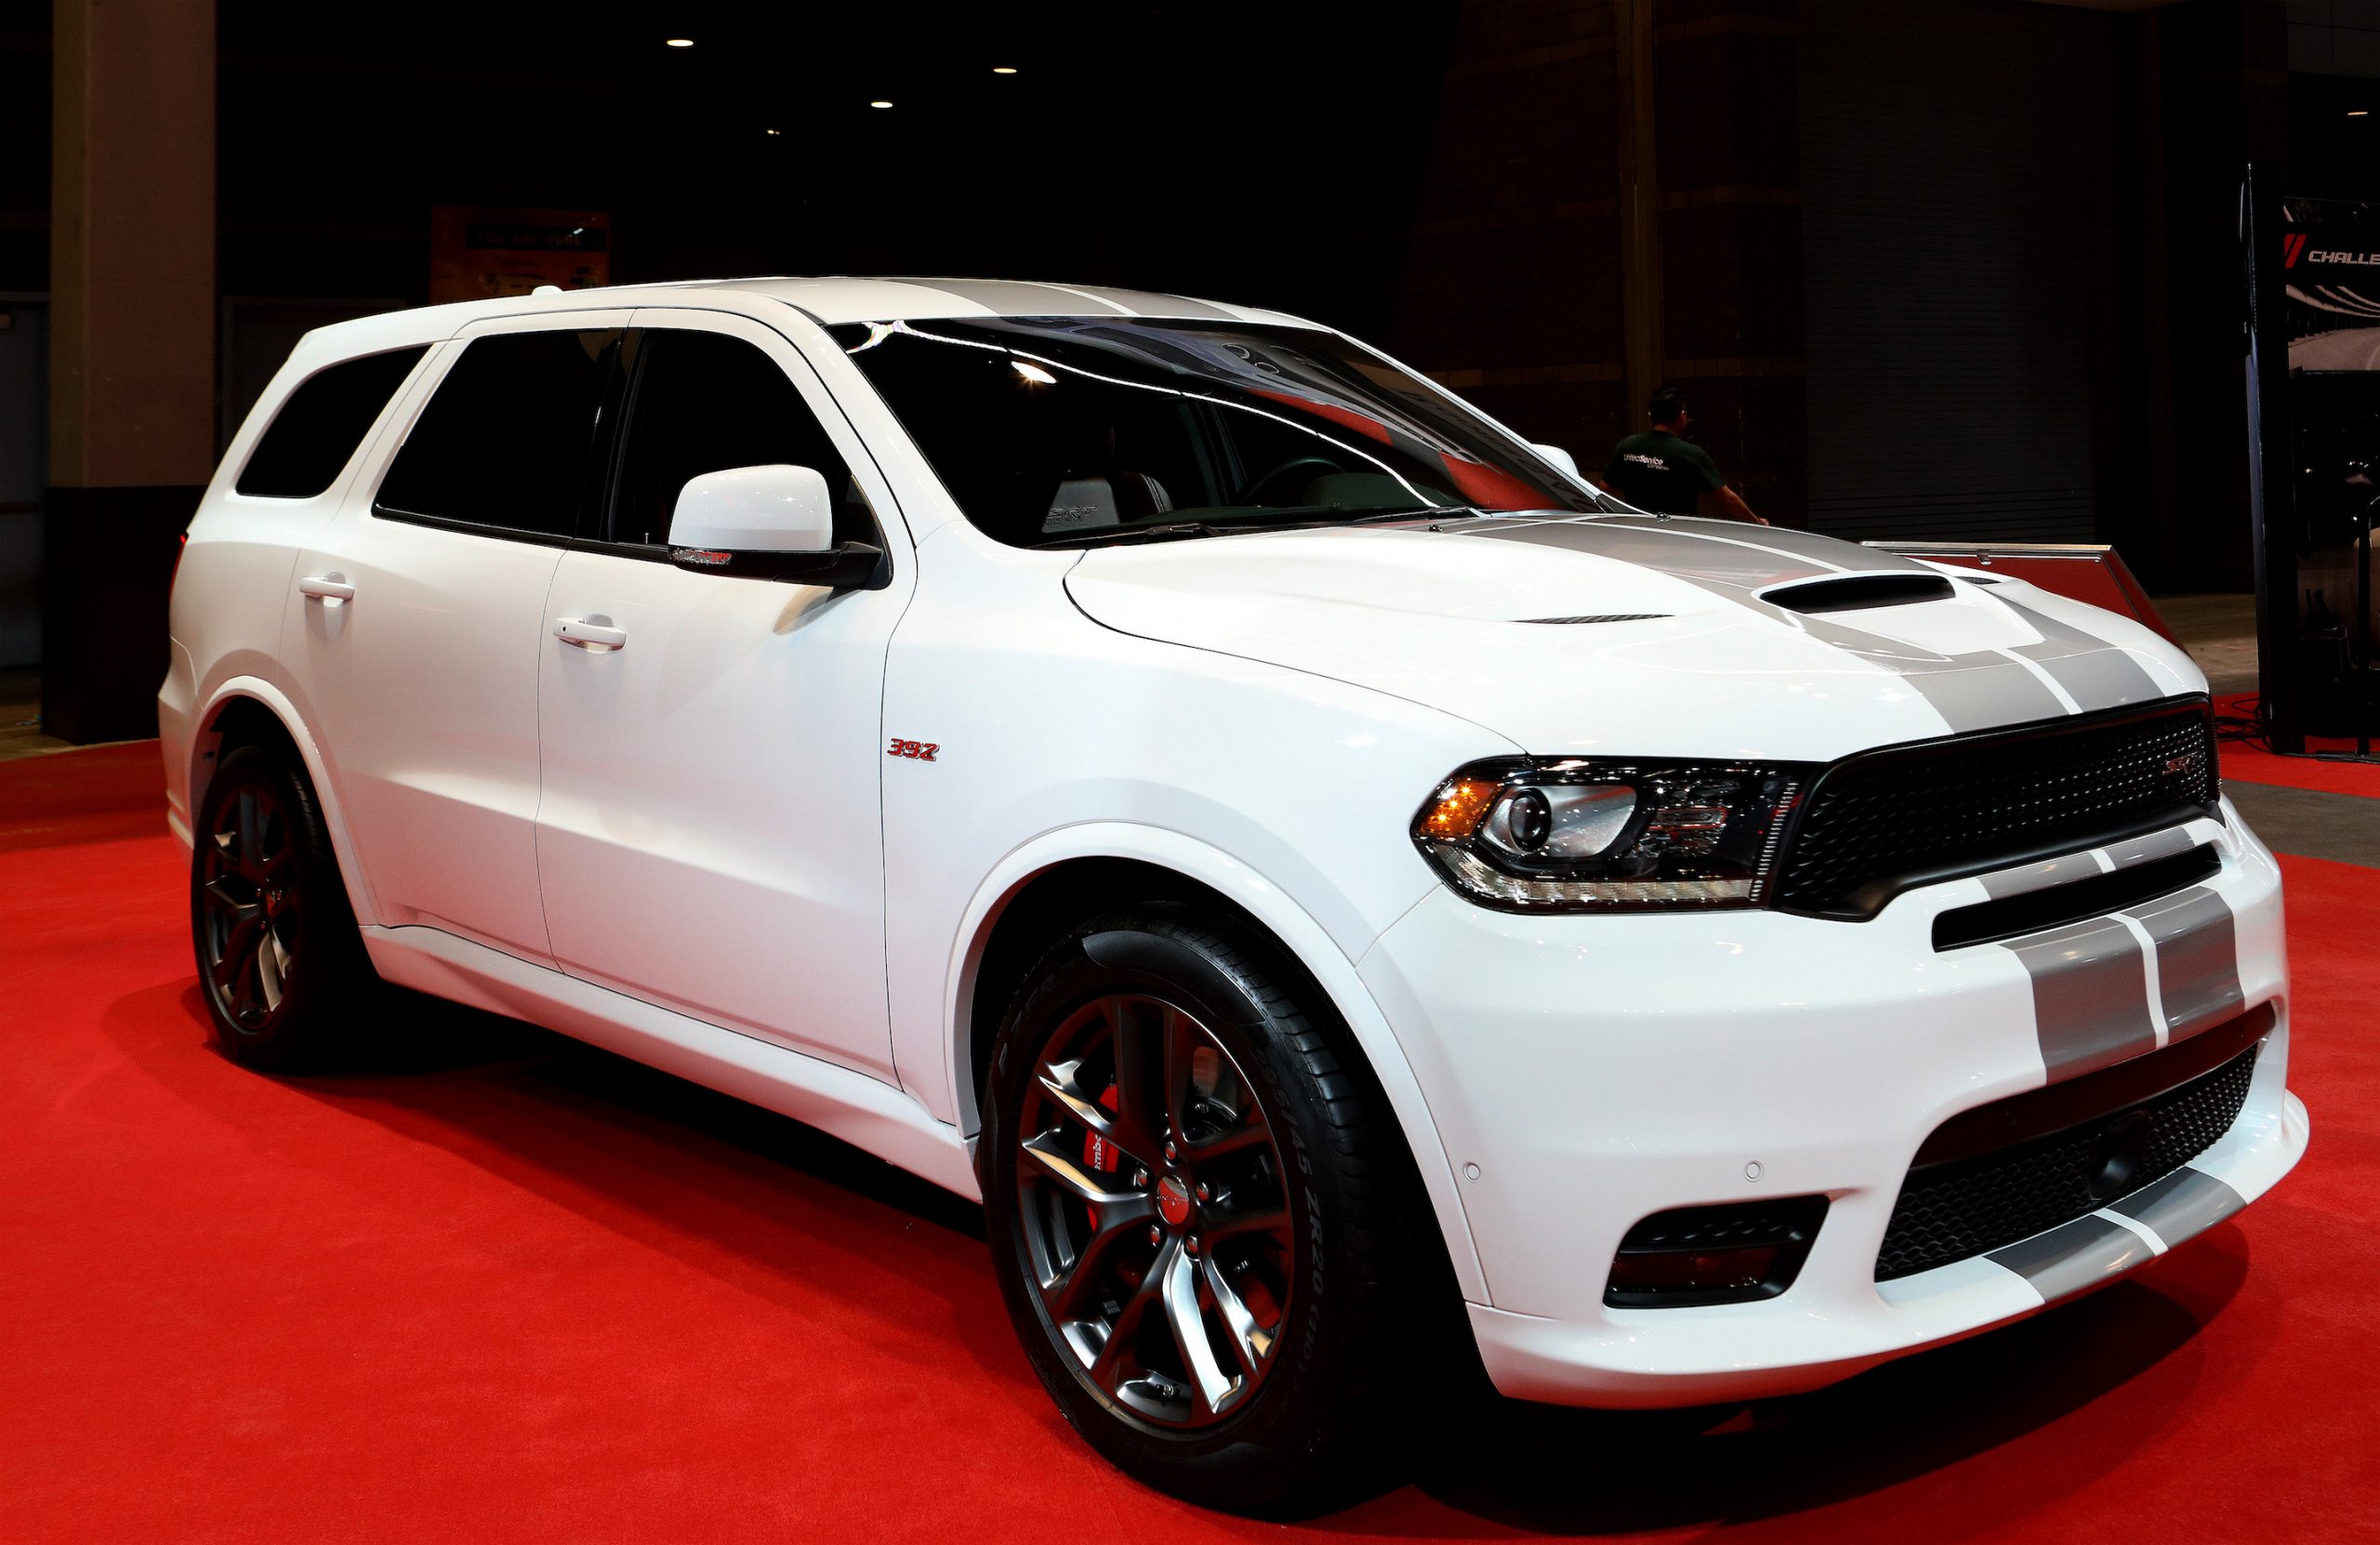 The 2021 Dodge Durango SRT Hellcat Predictably Offers Chills-Inducing